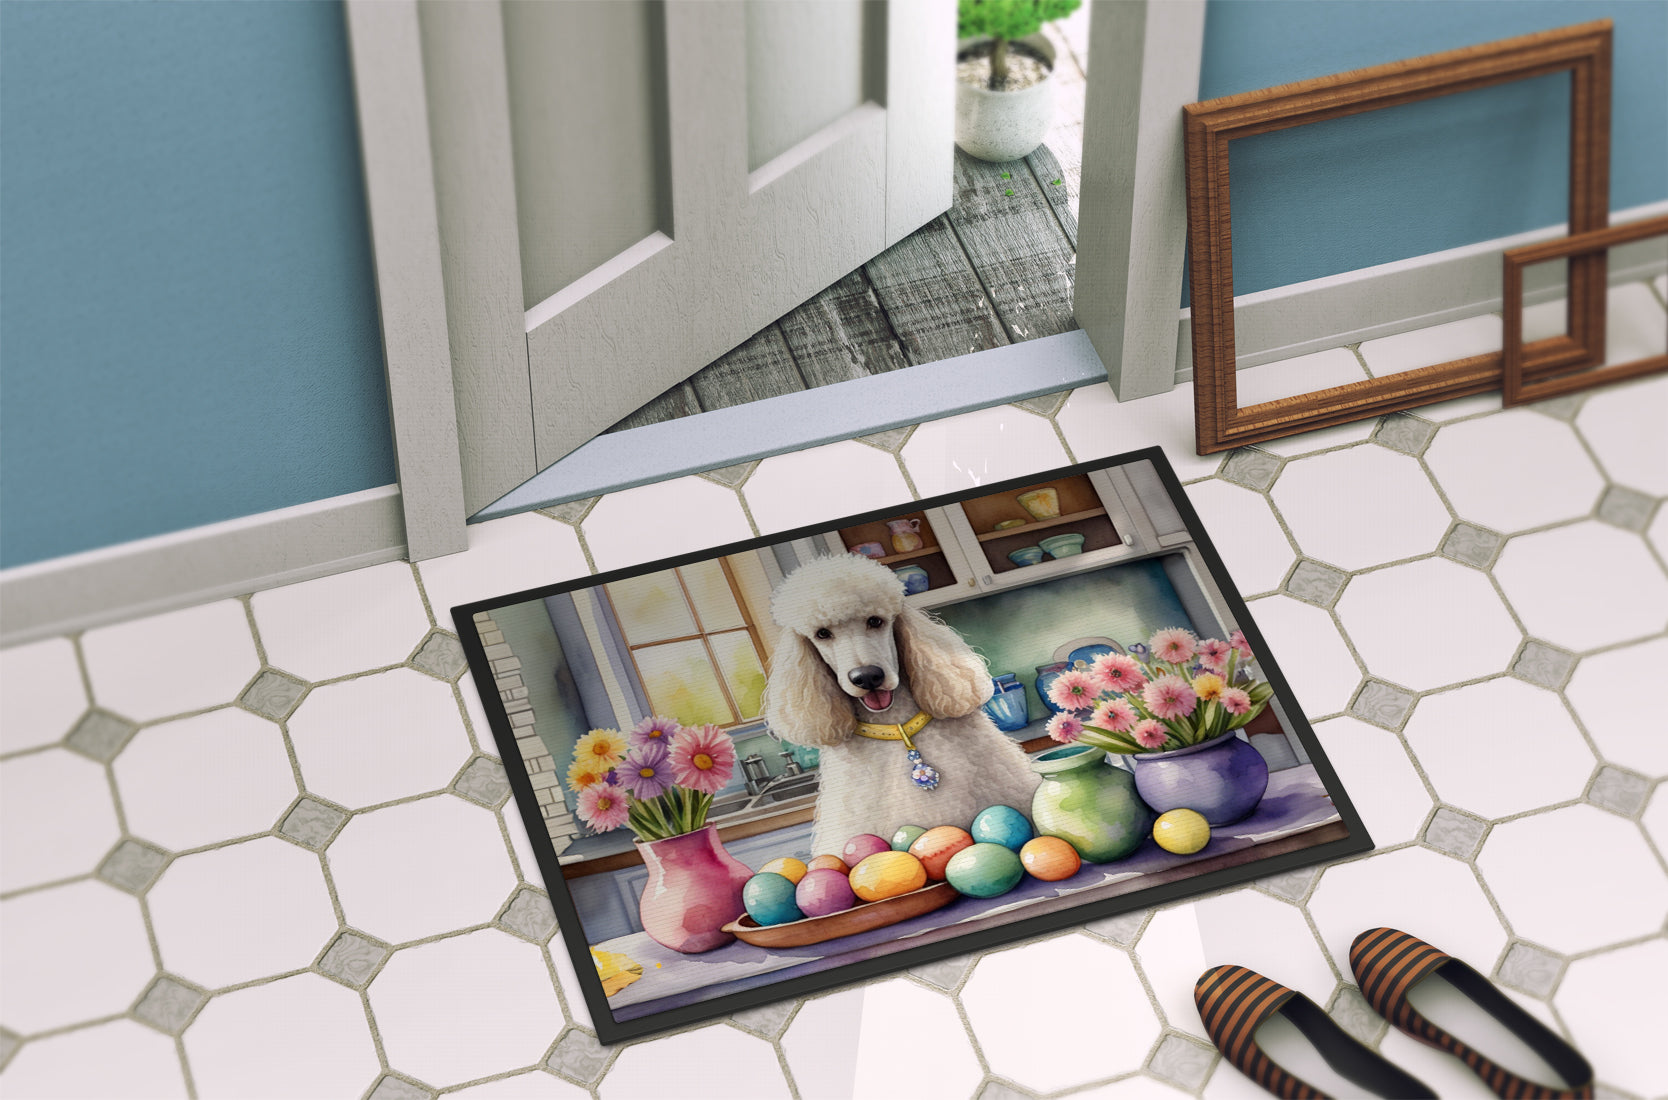 Decorating Easter White Poodle Doormat